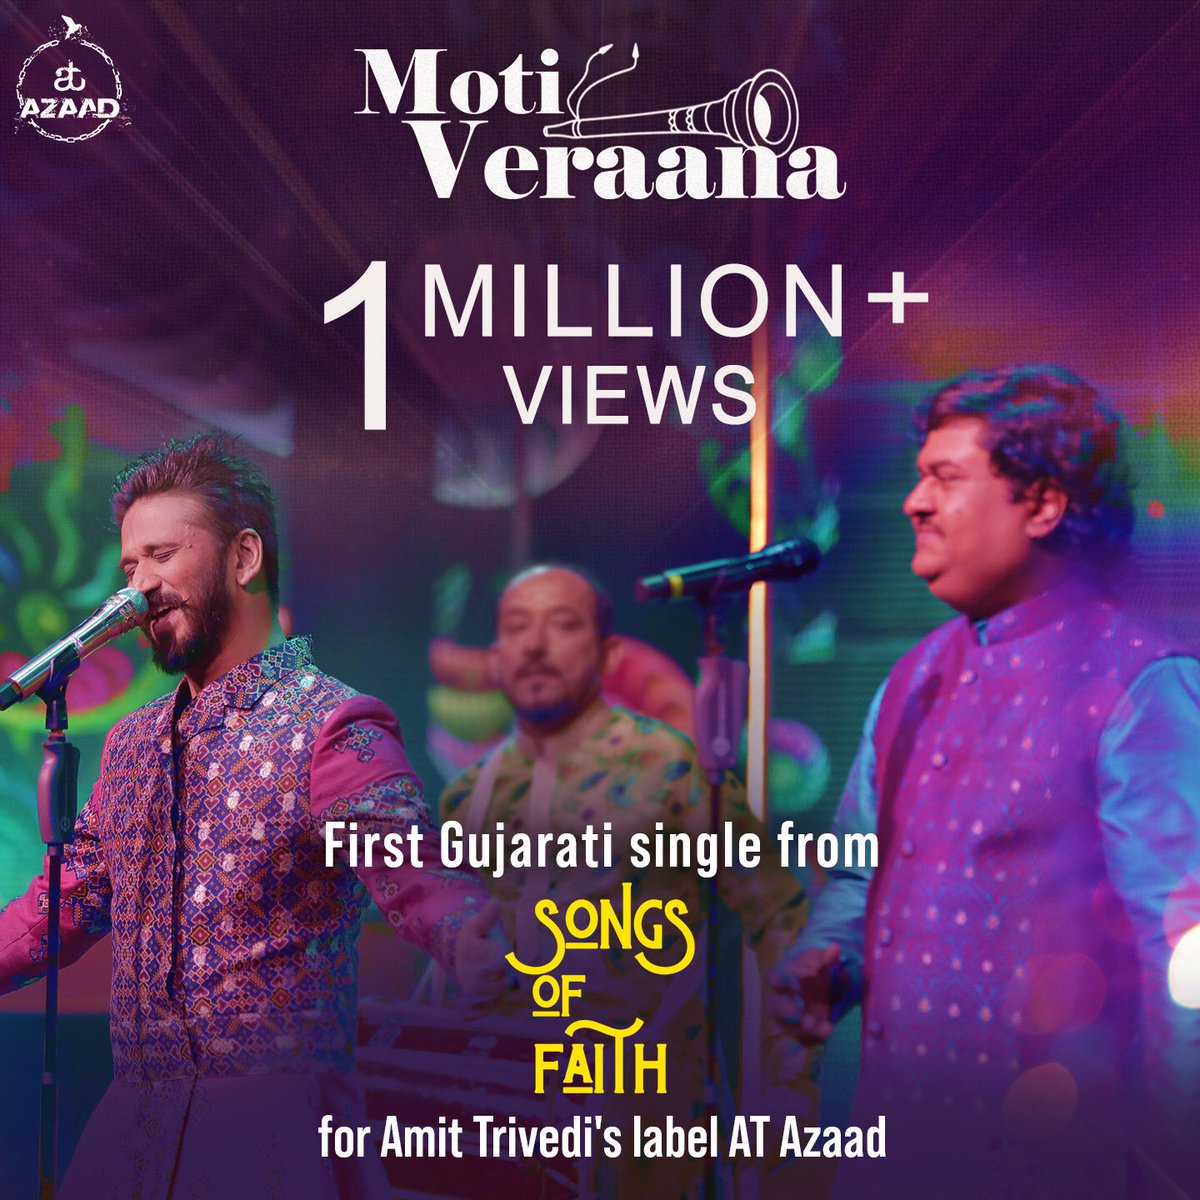 Osman Mir On Twitter Moti Verana Song Is Reached 1 Million Views Thanks You So Much For All Your Love And Support And Congratulations To Amit Trivedi And Musician Team Song Link From navratri songs (2020) moti verana chokma avya ambe ma album, moti verana chokma song sung by amit trivedi, osman mir, this latest song music composed by jayashri trivedi and lyrics written by jayashri trivedi, amit trivedi, download. osman mir on twitter moti verana song